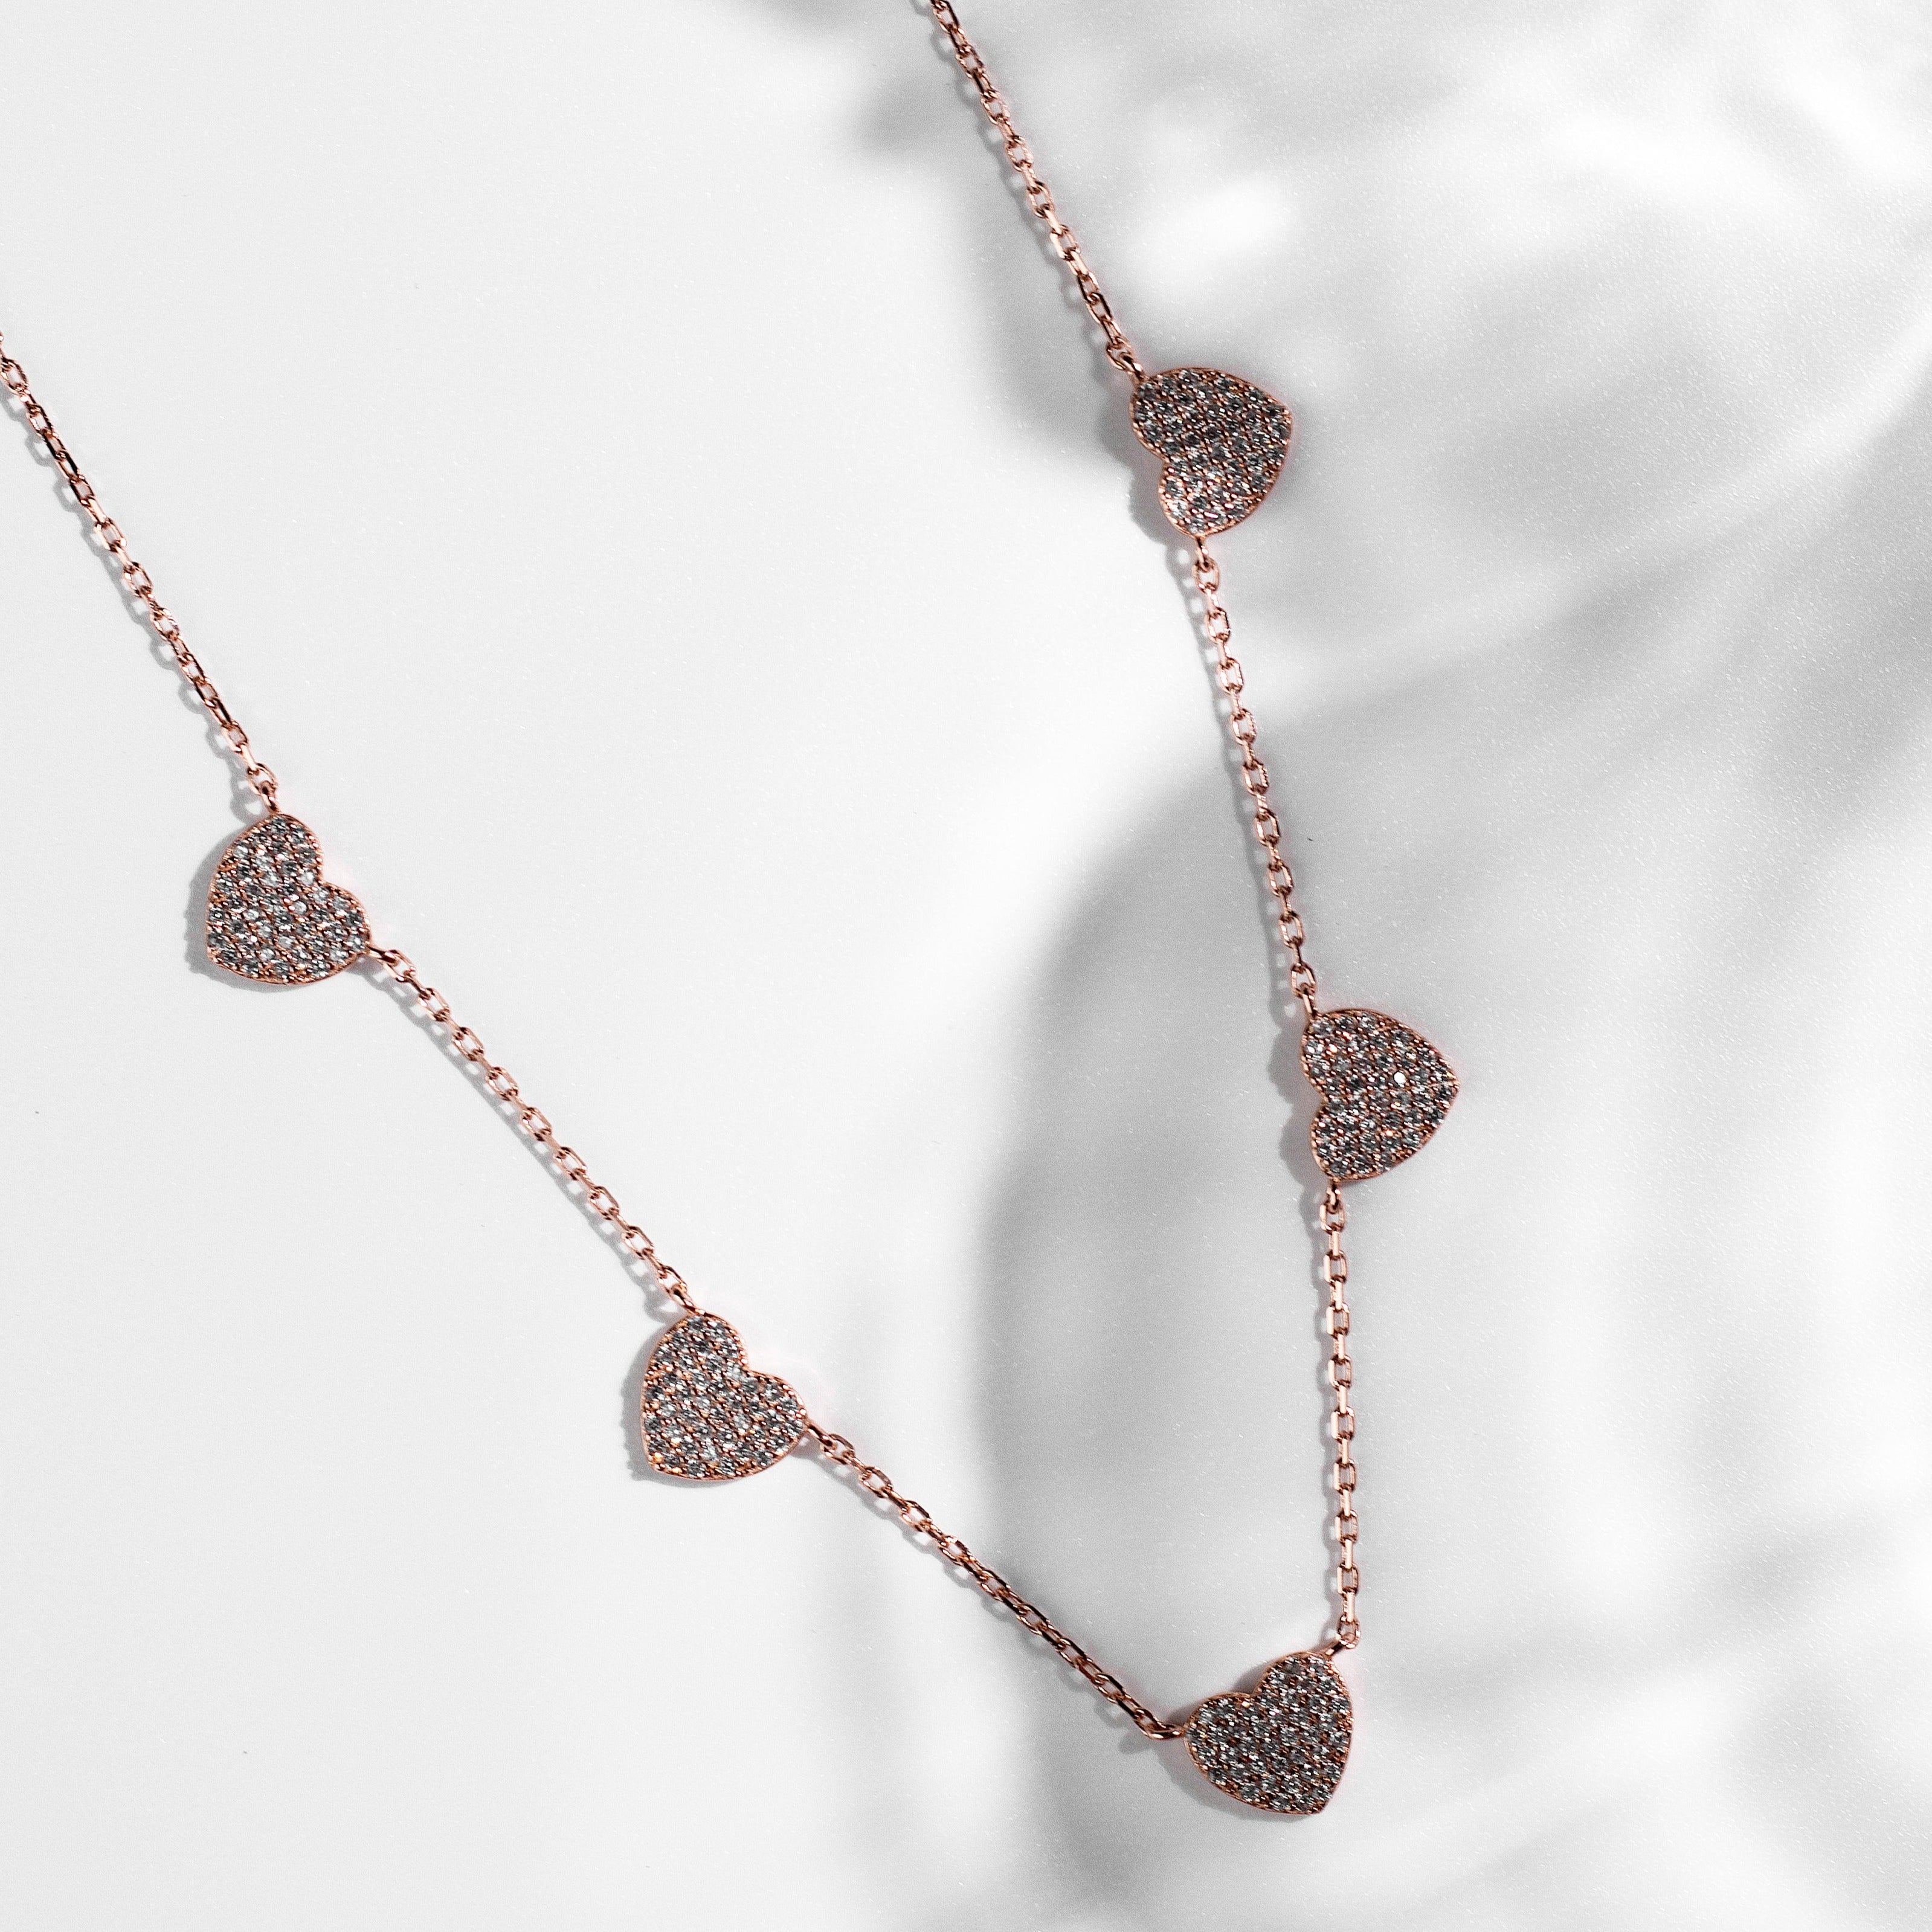 Necklace Heart Chain Sterling Silver 925 Rose Gold